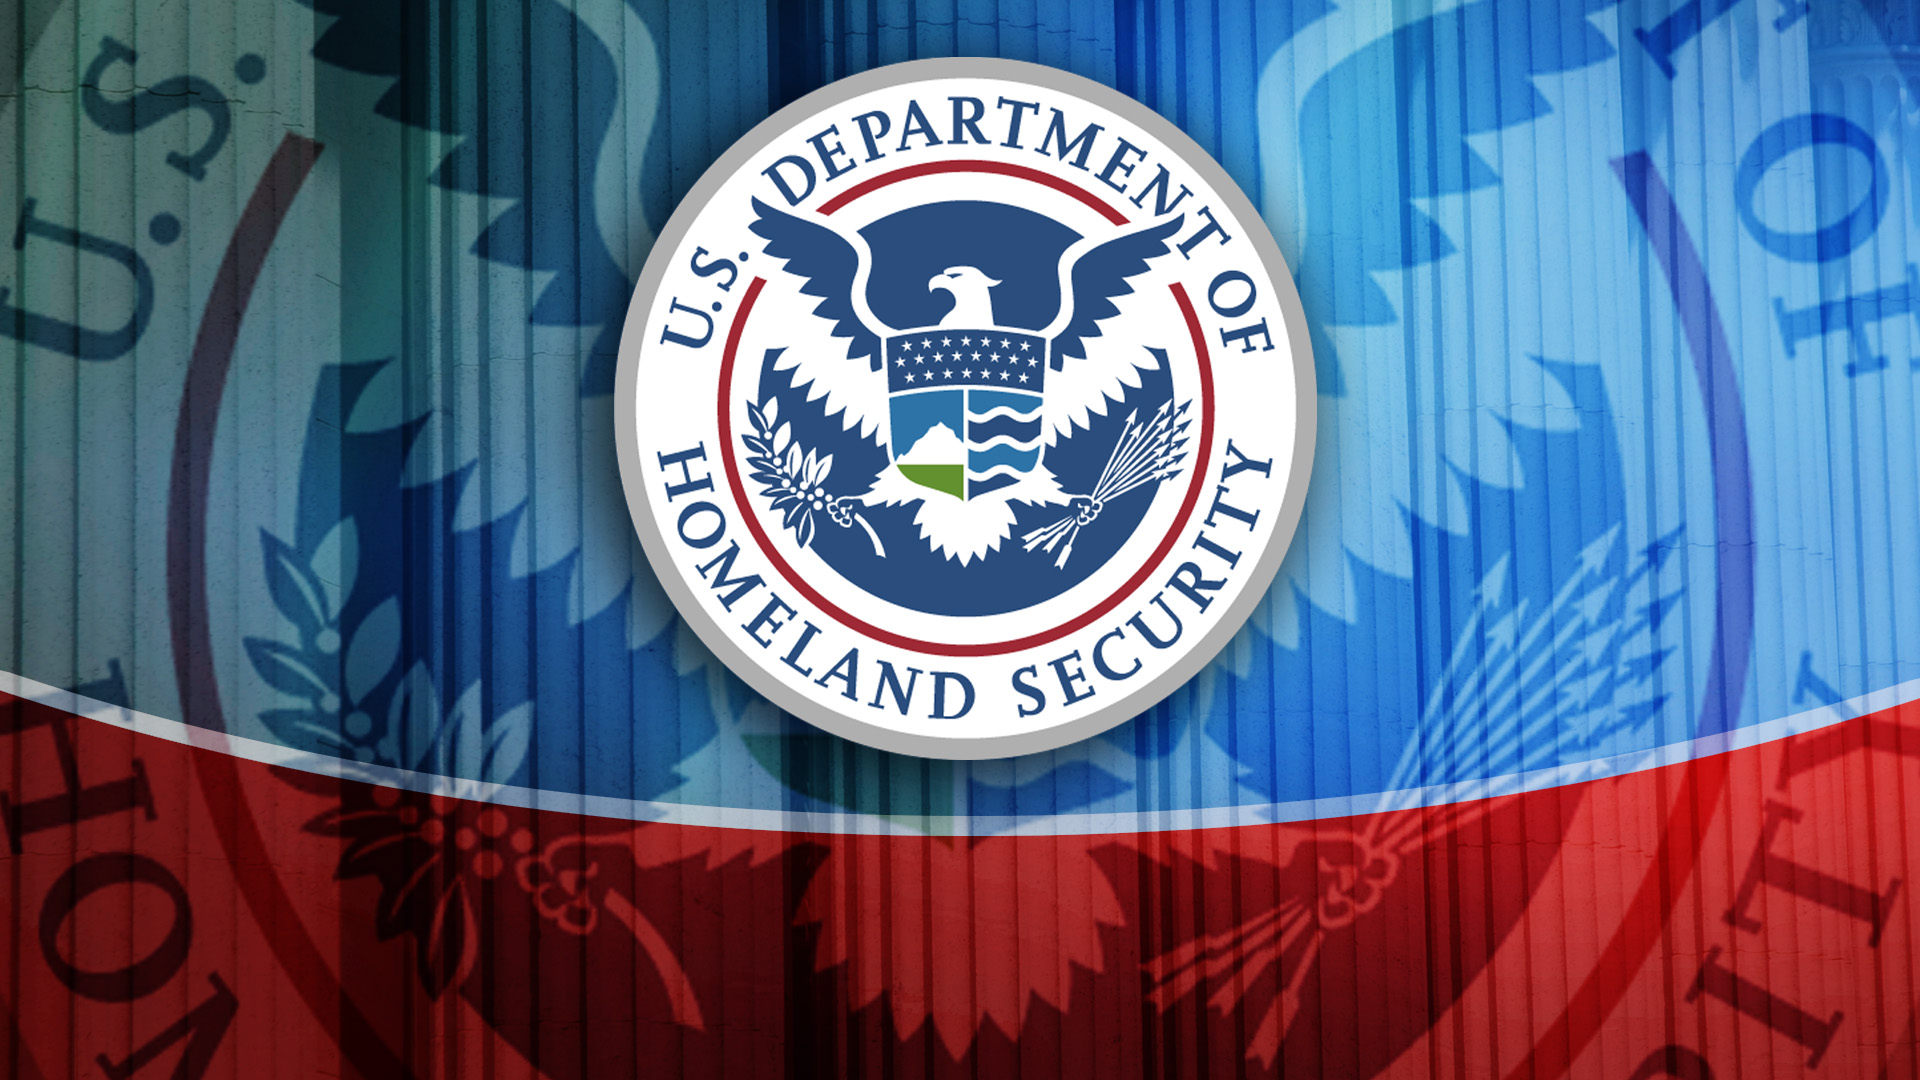 Department Of Homeland Security Flag